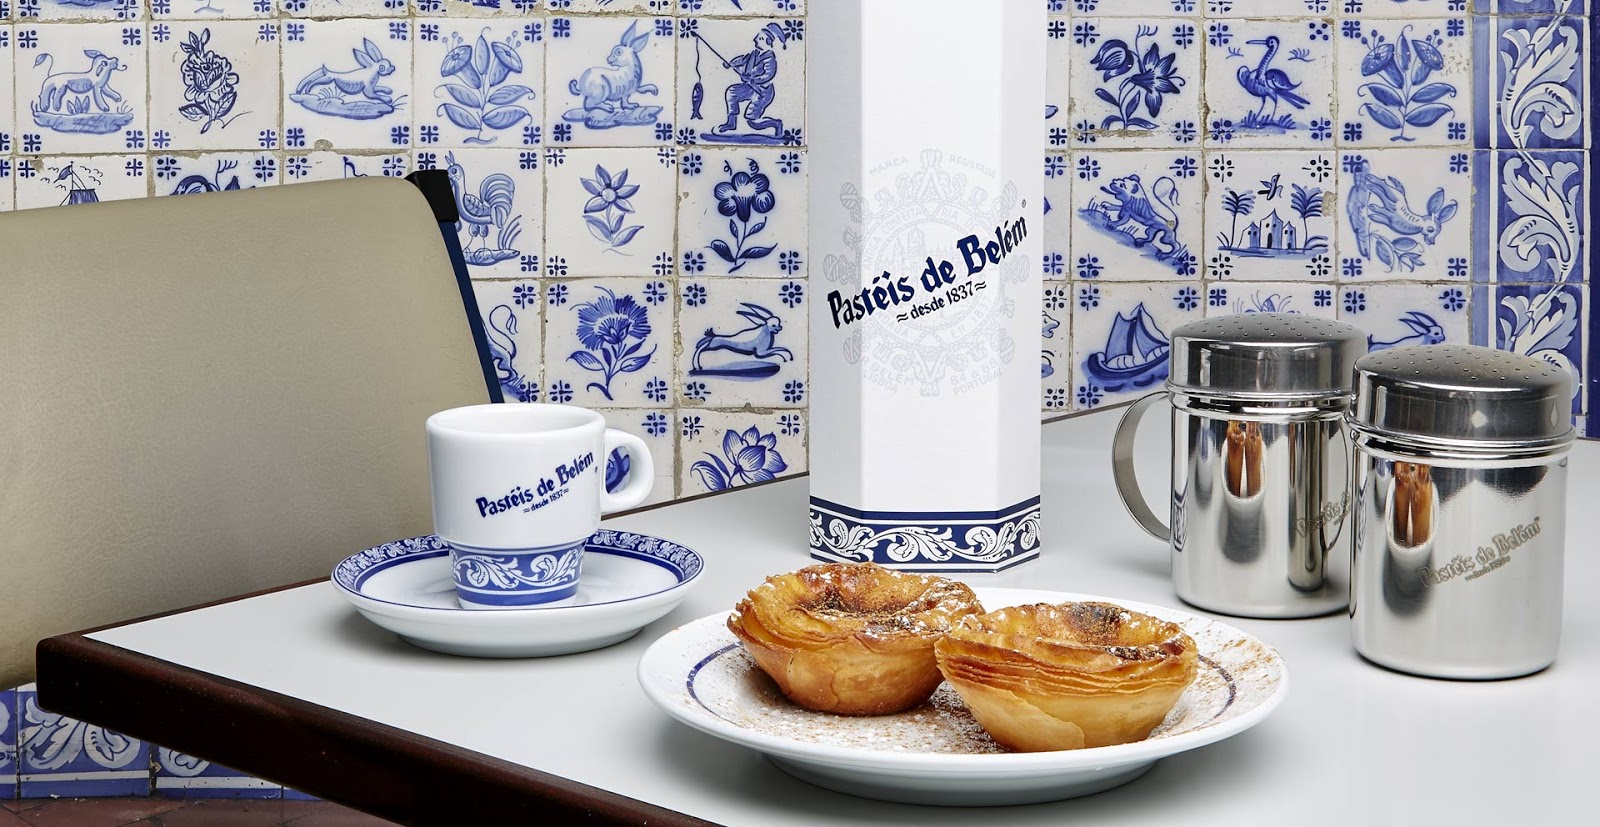 Pasteis de Belem, the famous custard tart, Portugal is so well known about